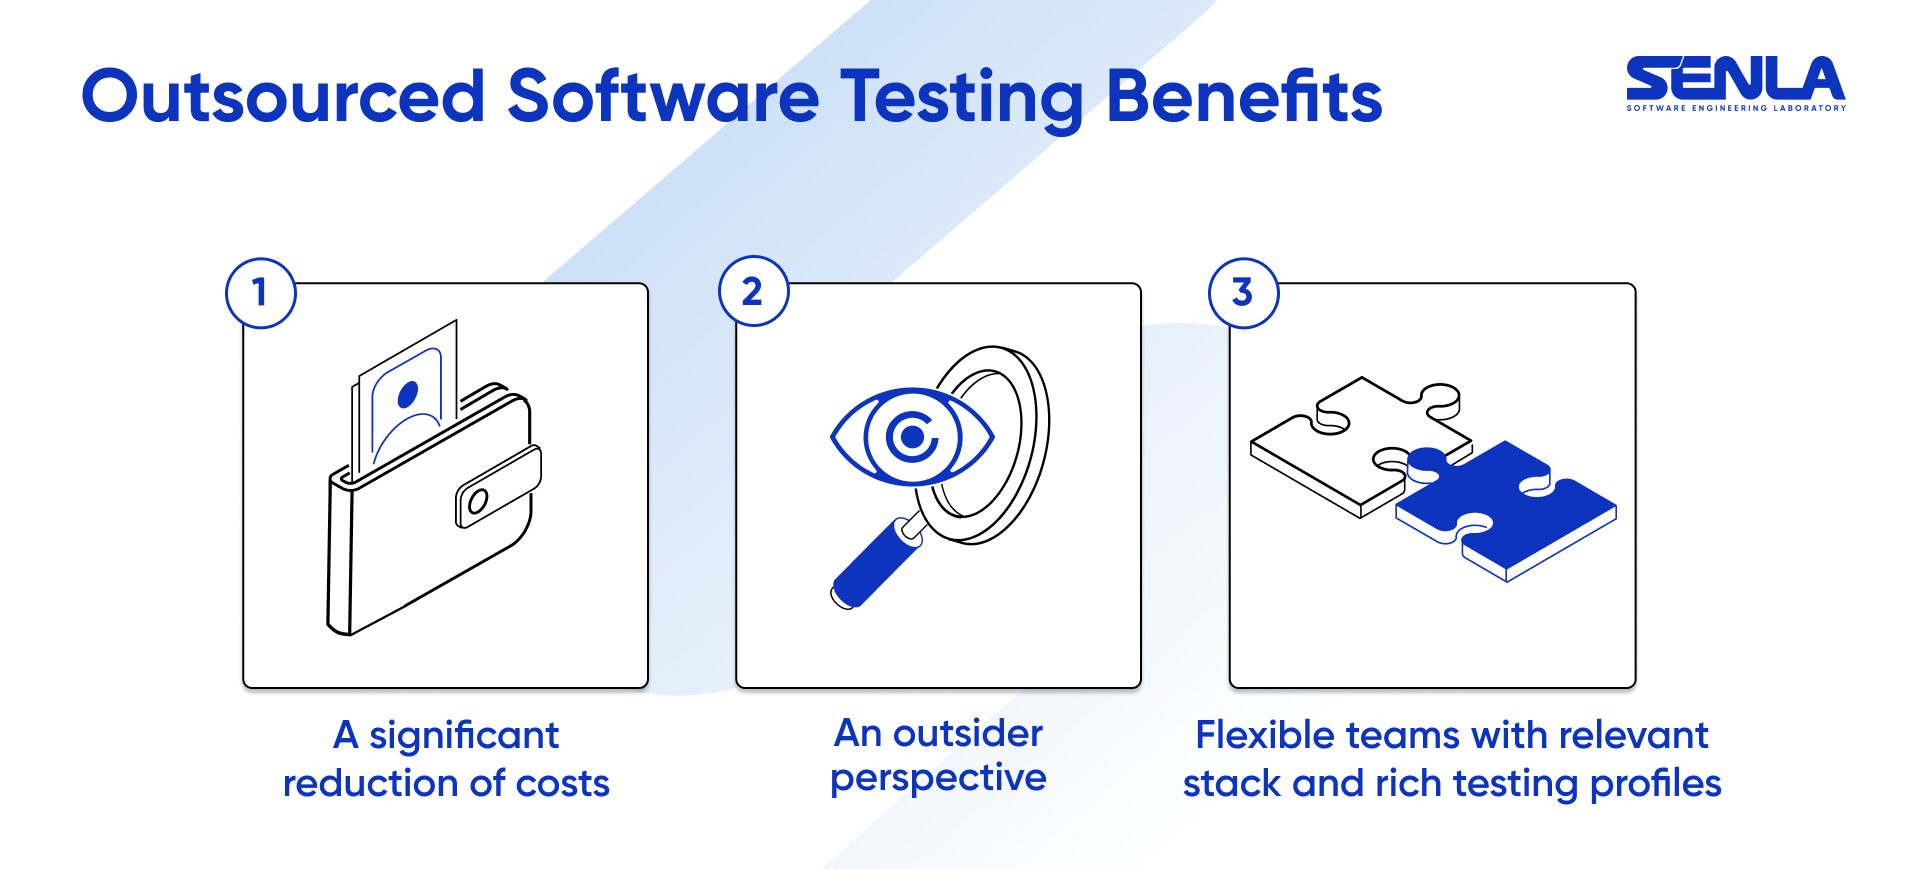 Outsourced software testing benefits PC